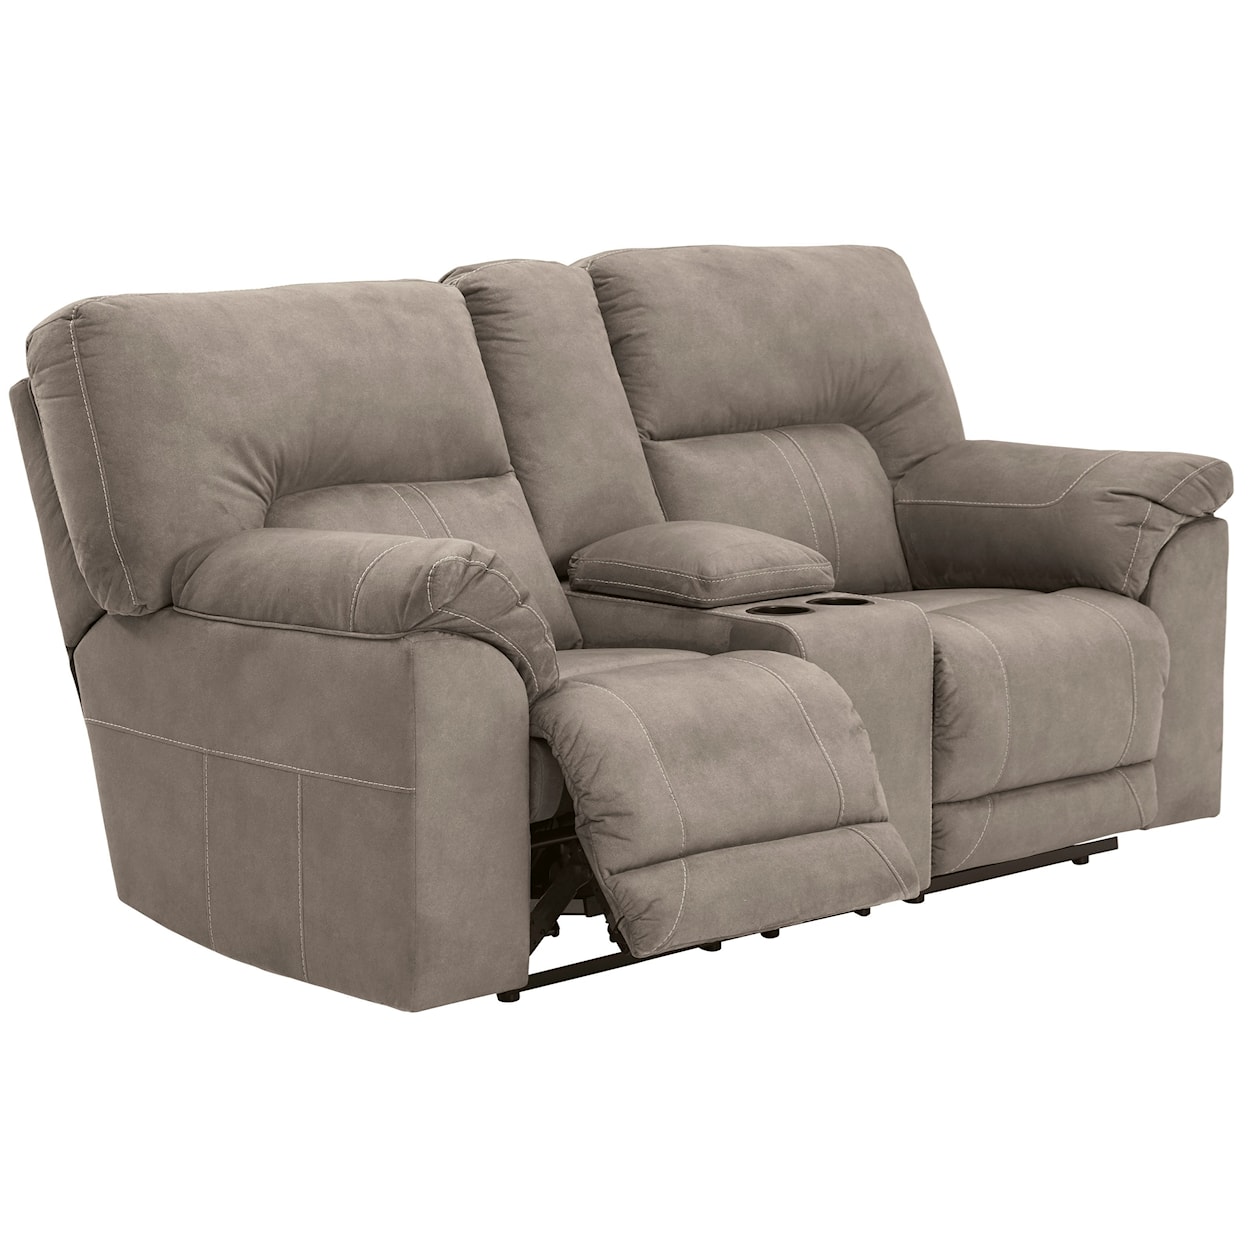 Benchcraft Cavalcade Double Reclining Loveseat with Console